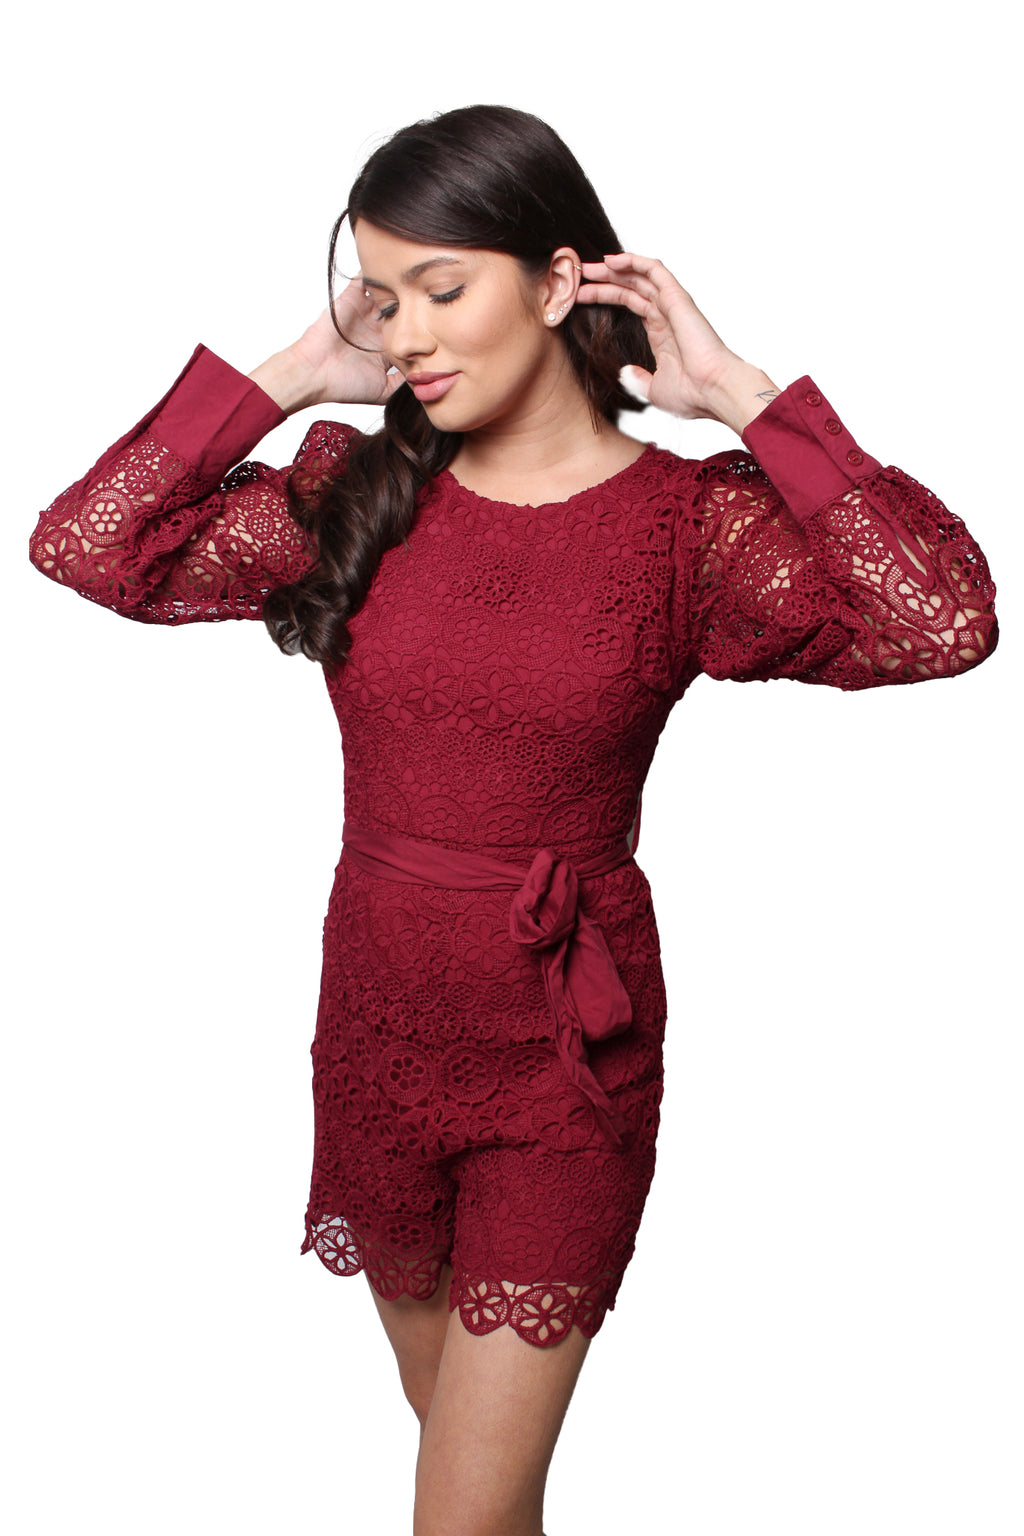 Women's Long Sleeve Round Neck Embroidered Romper